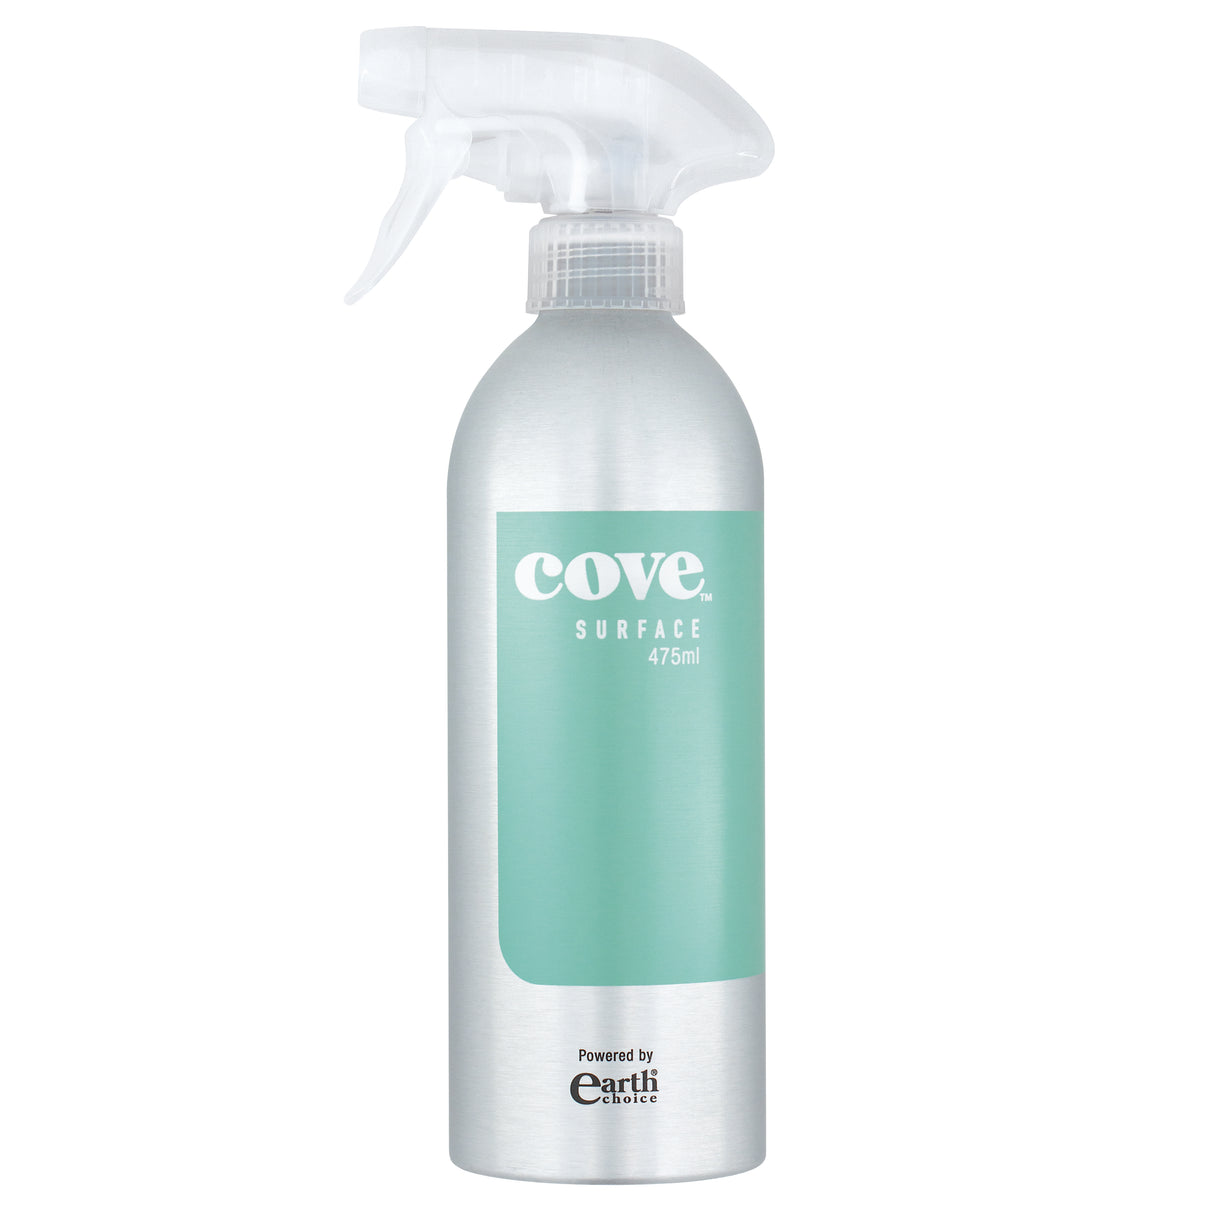 Cove Surface Cleaner 475ml